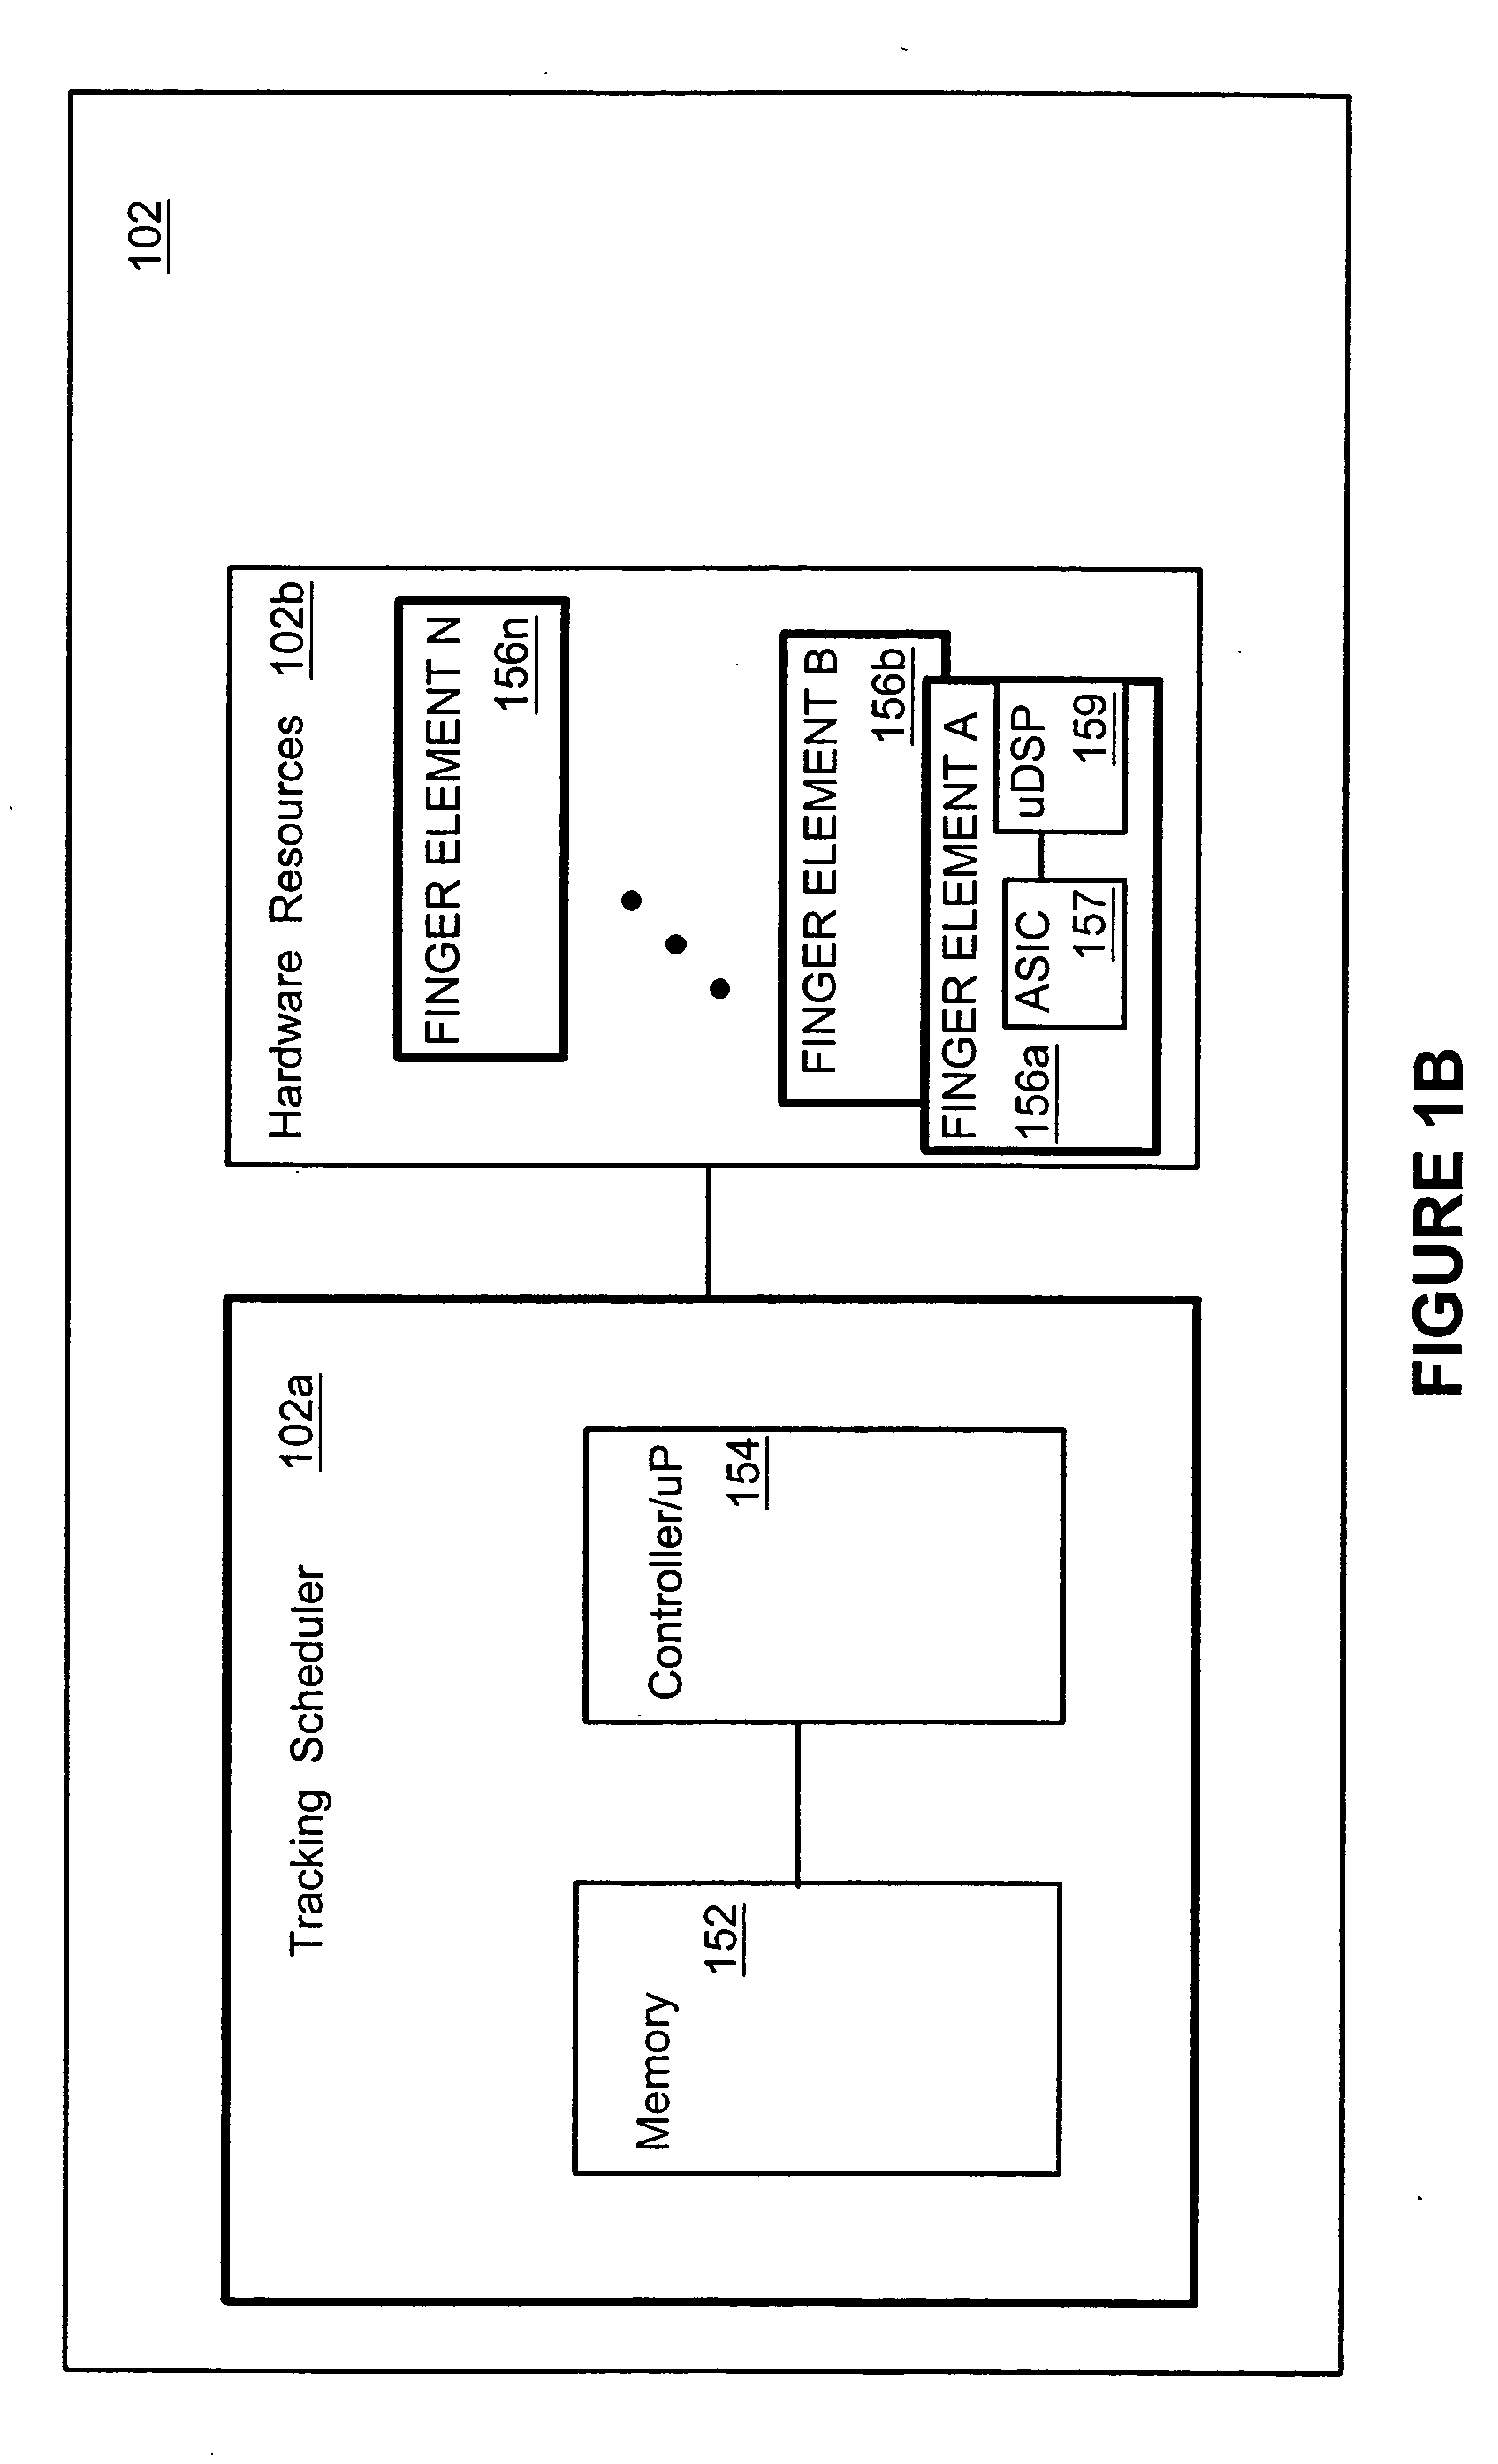 Method and apparatus for software-based allocation and scheduling of hardware resources in an electronic device